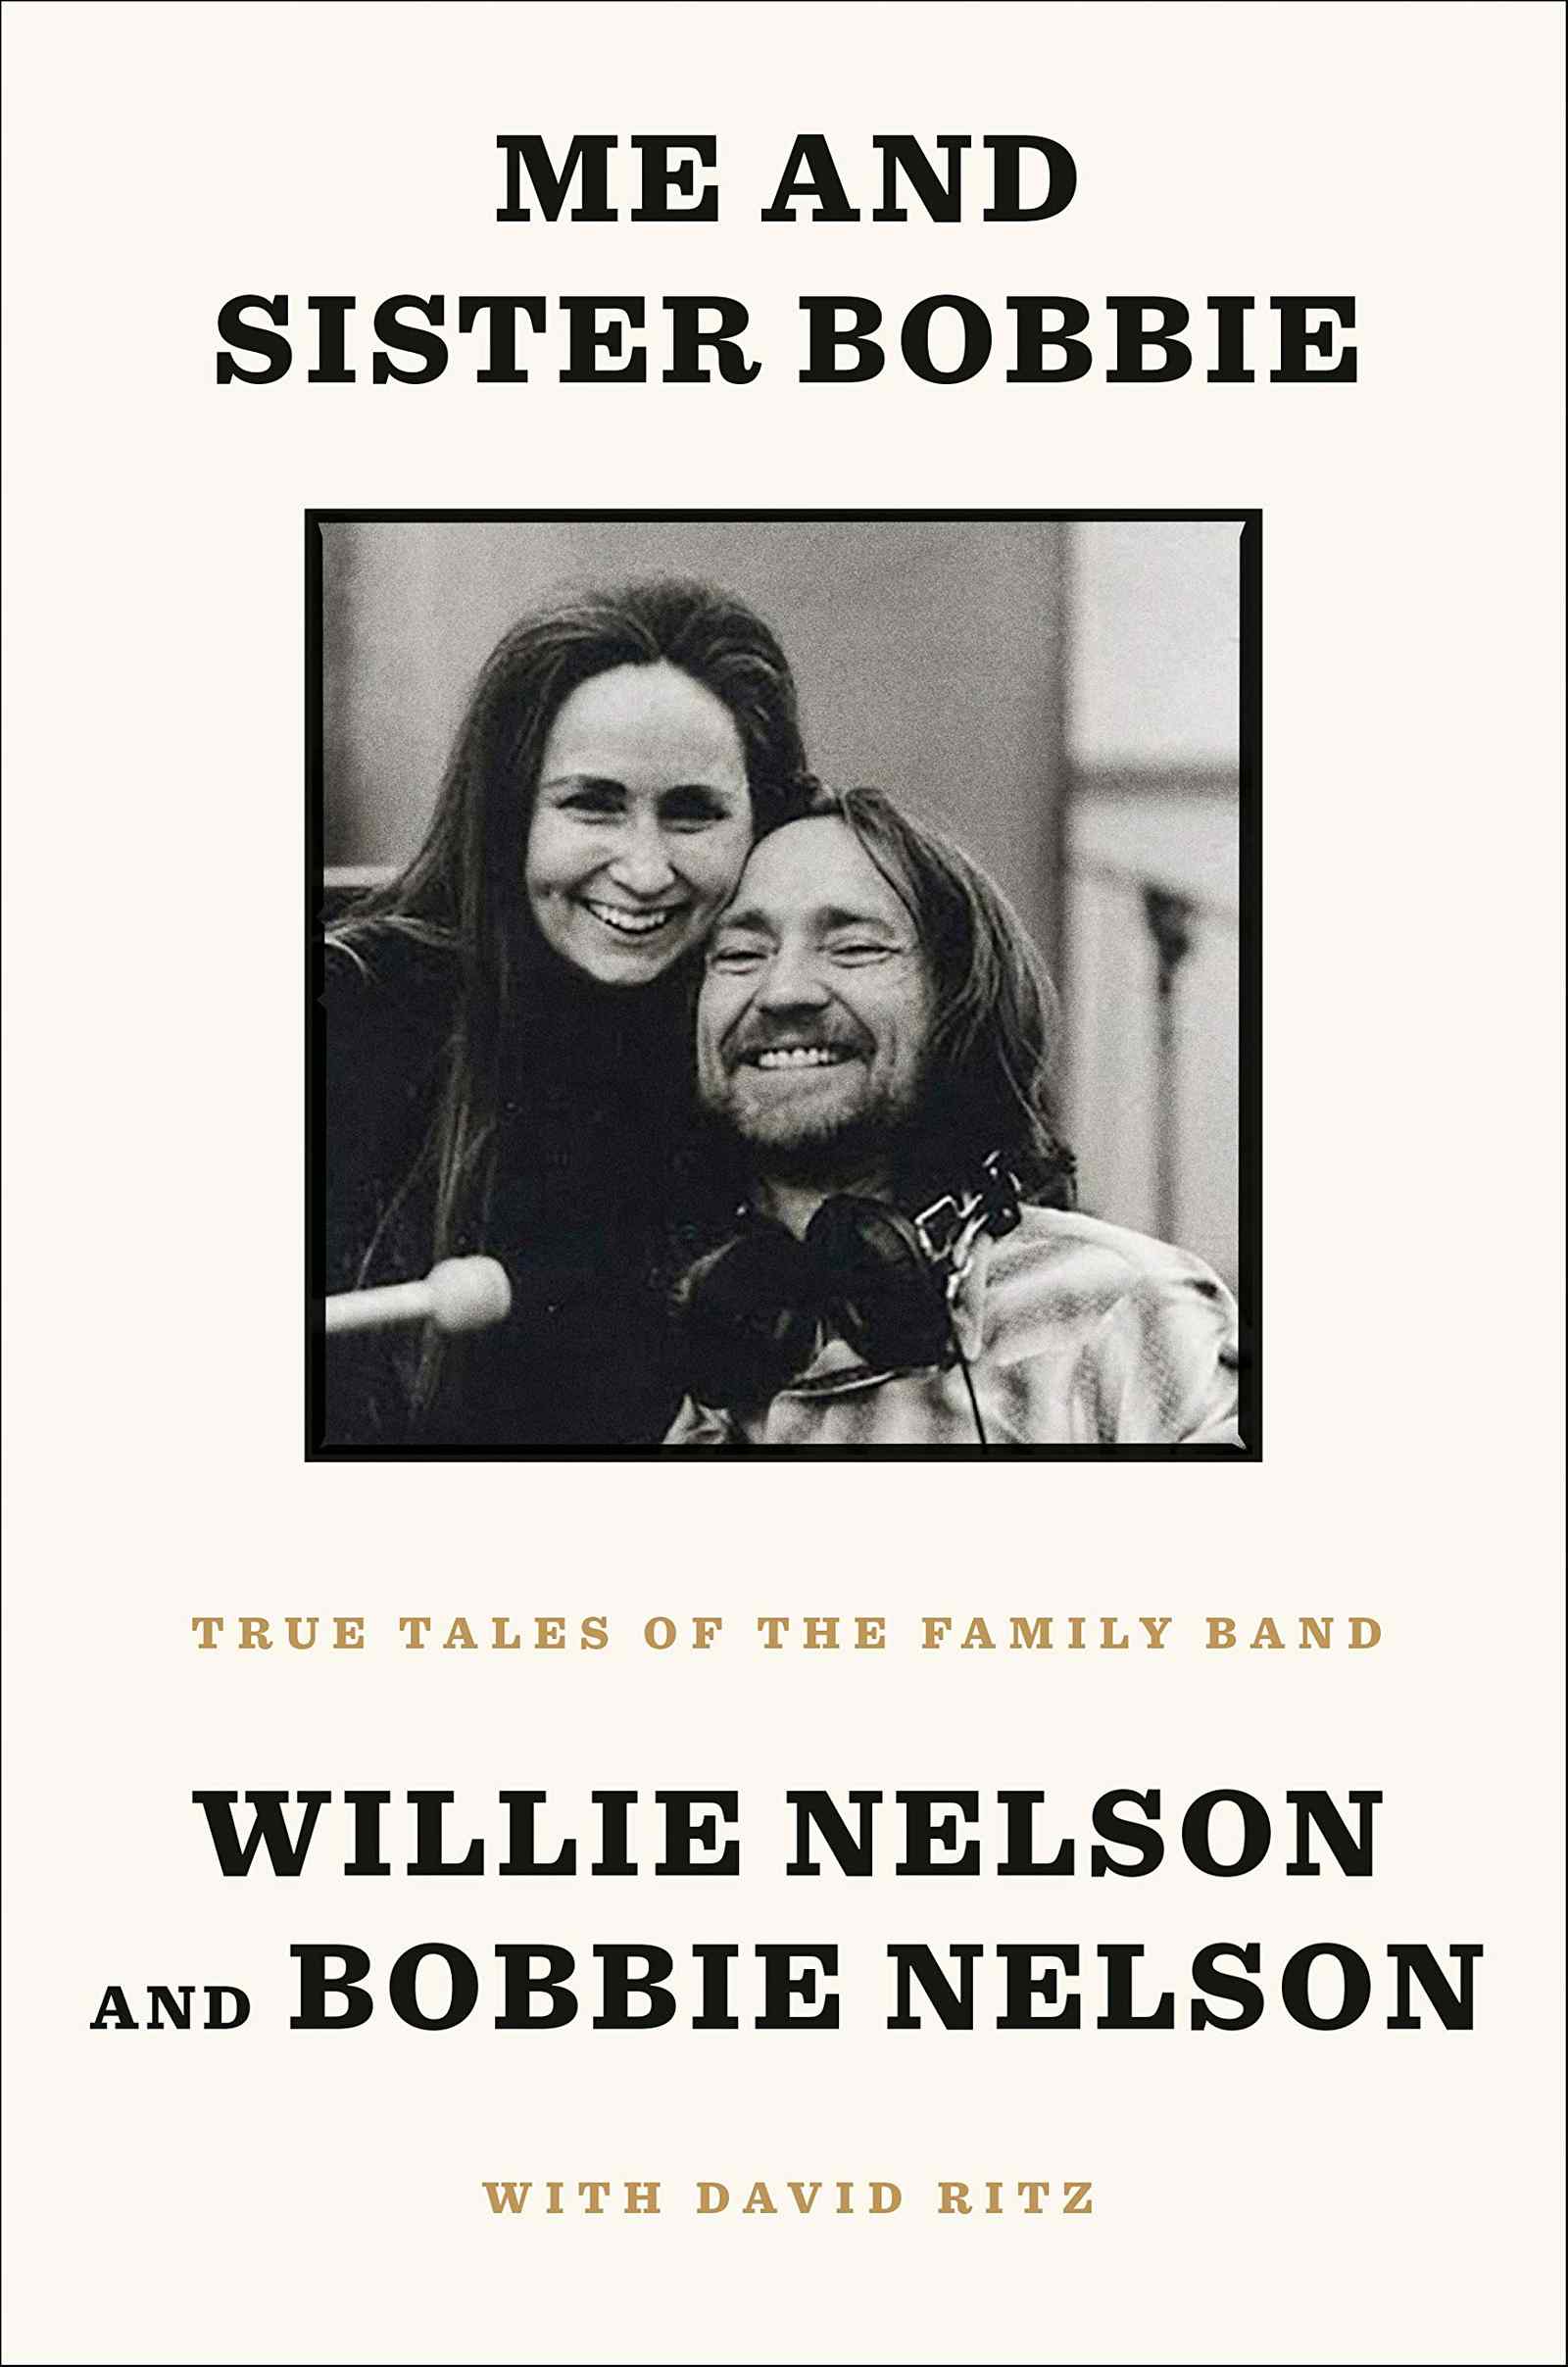 "Me and Sister Bobbie: True Tales of a Family Band" - Willie and Bobbie Nelson with David Ritz